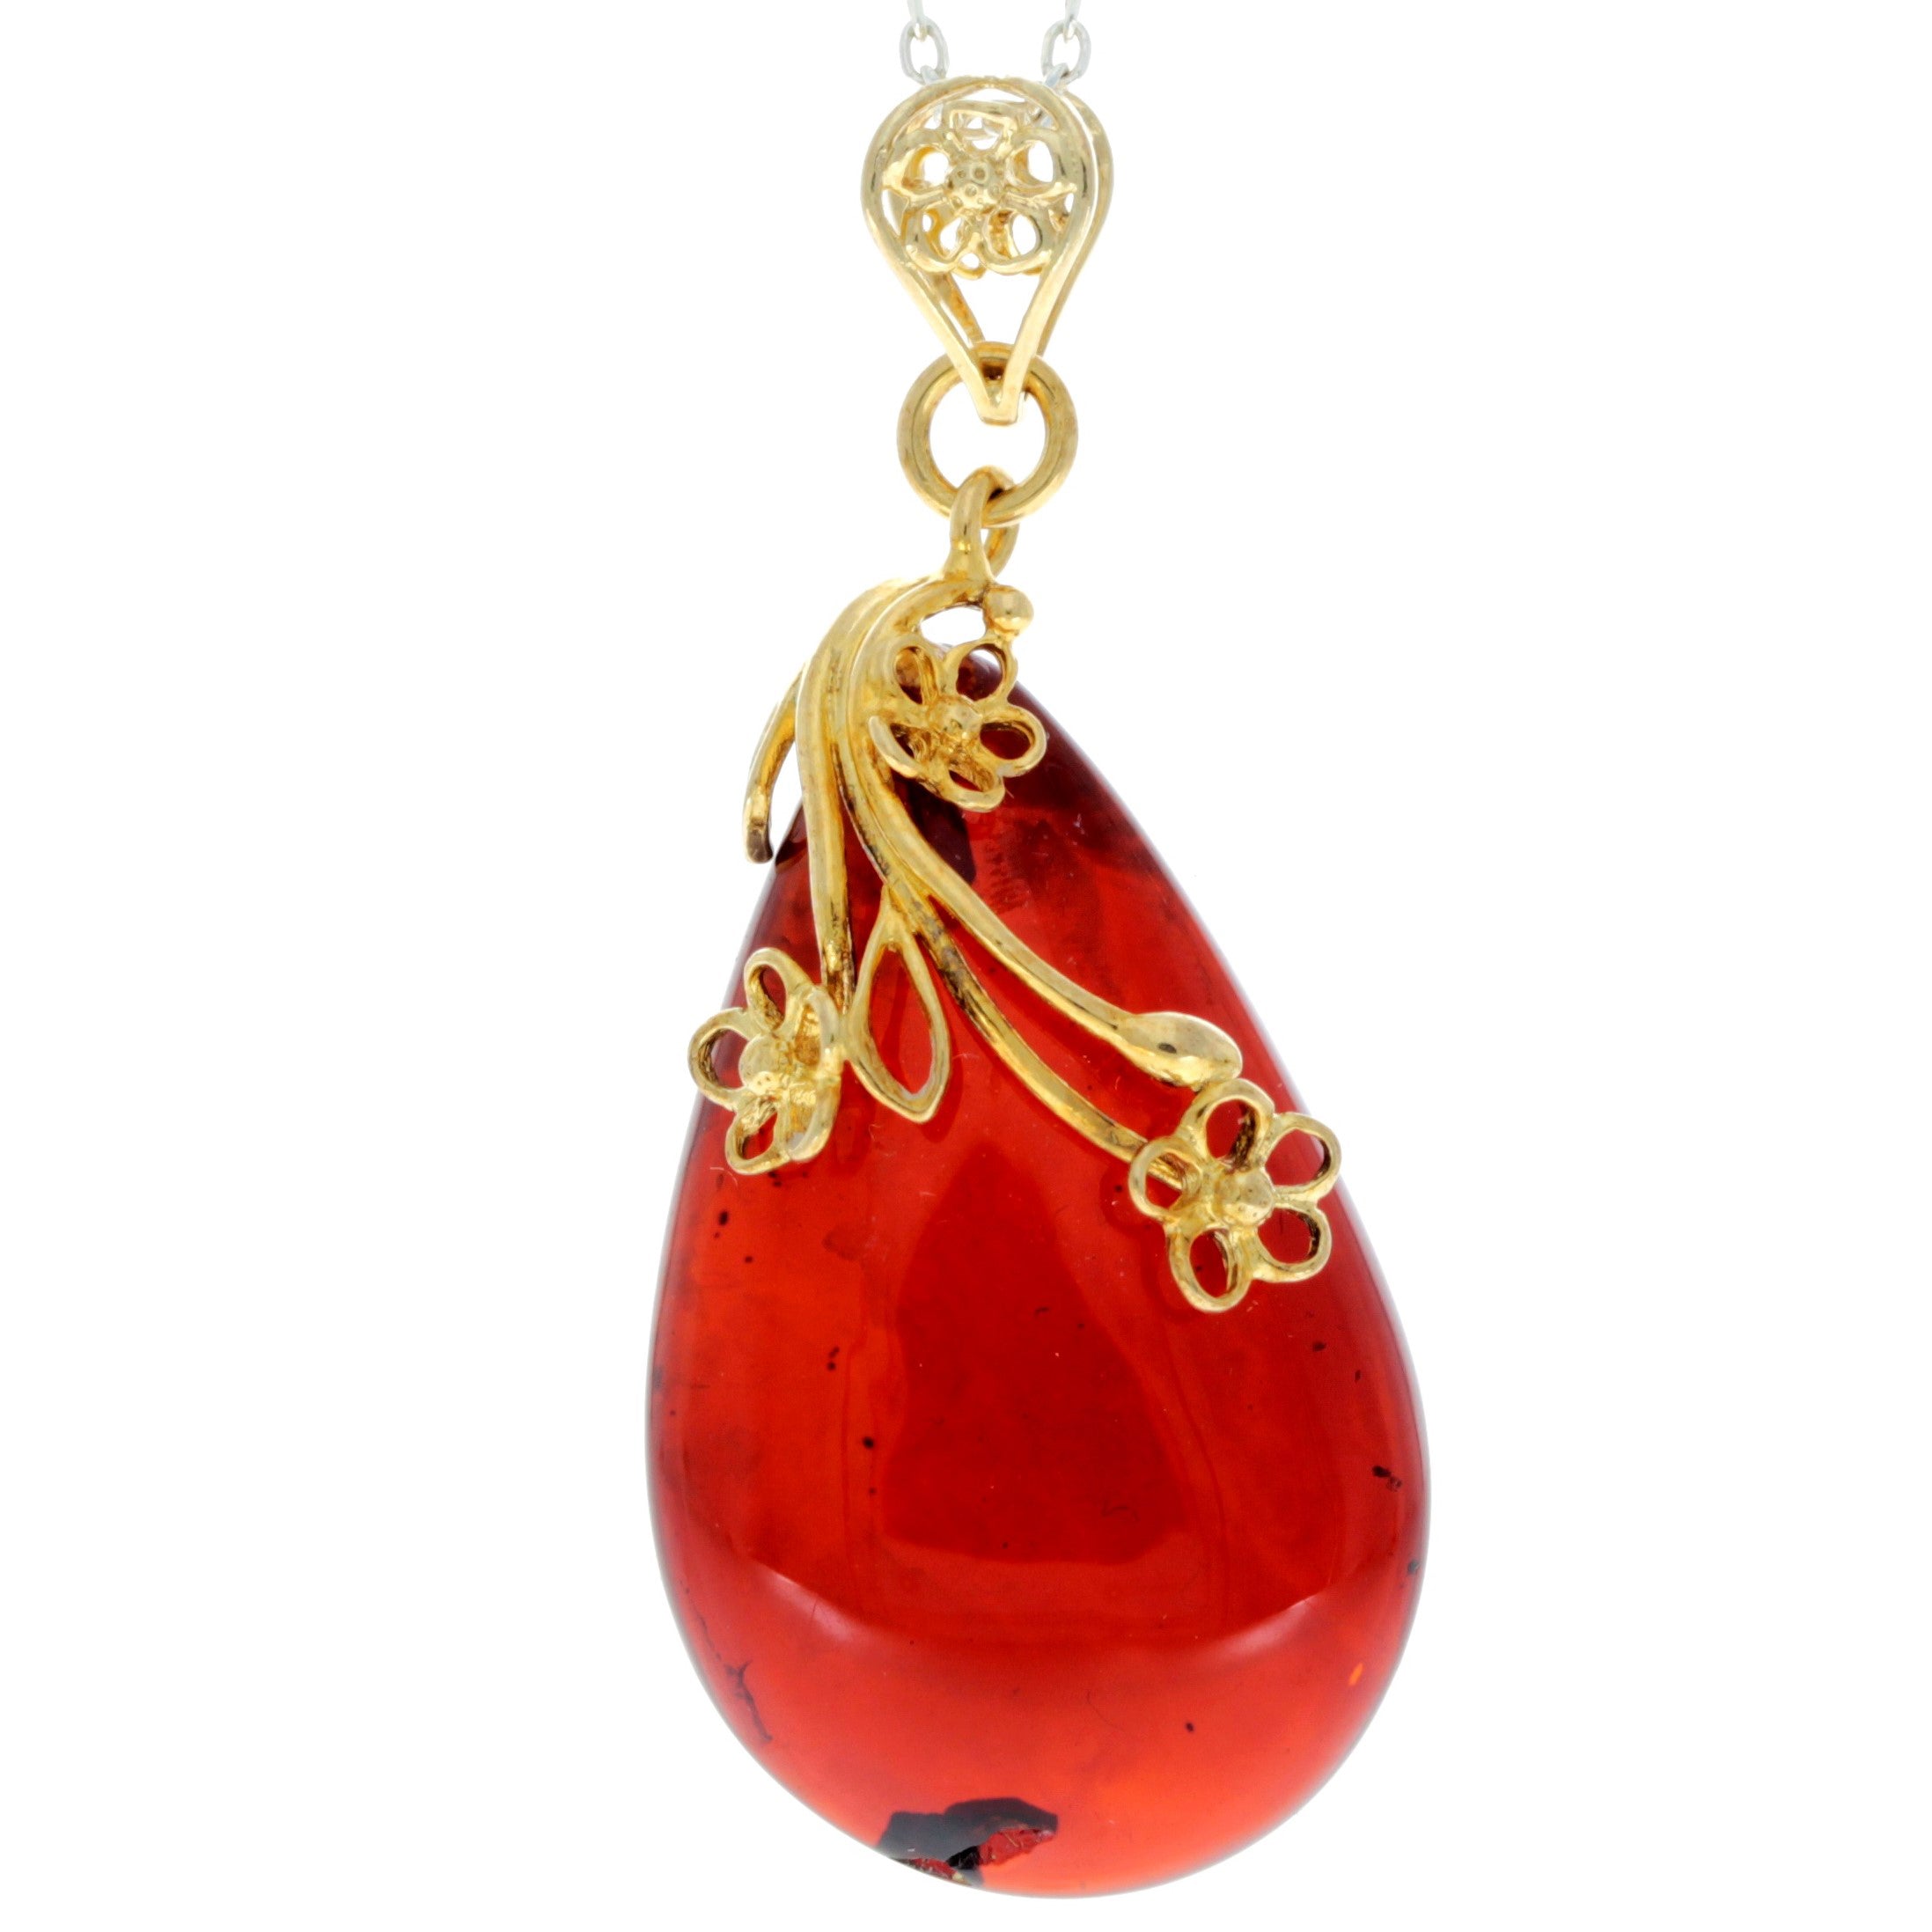 925 Sterling Silver Gold Plated with 14 ct Gold & Genuine Cherry Baltic Amber Exclusive Unique Pendant - GPD004